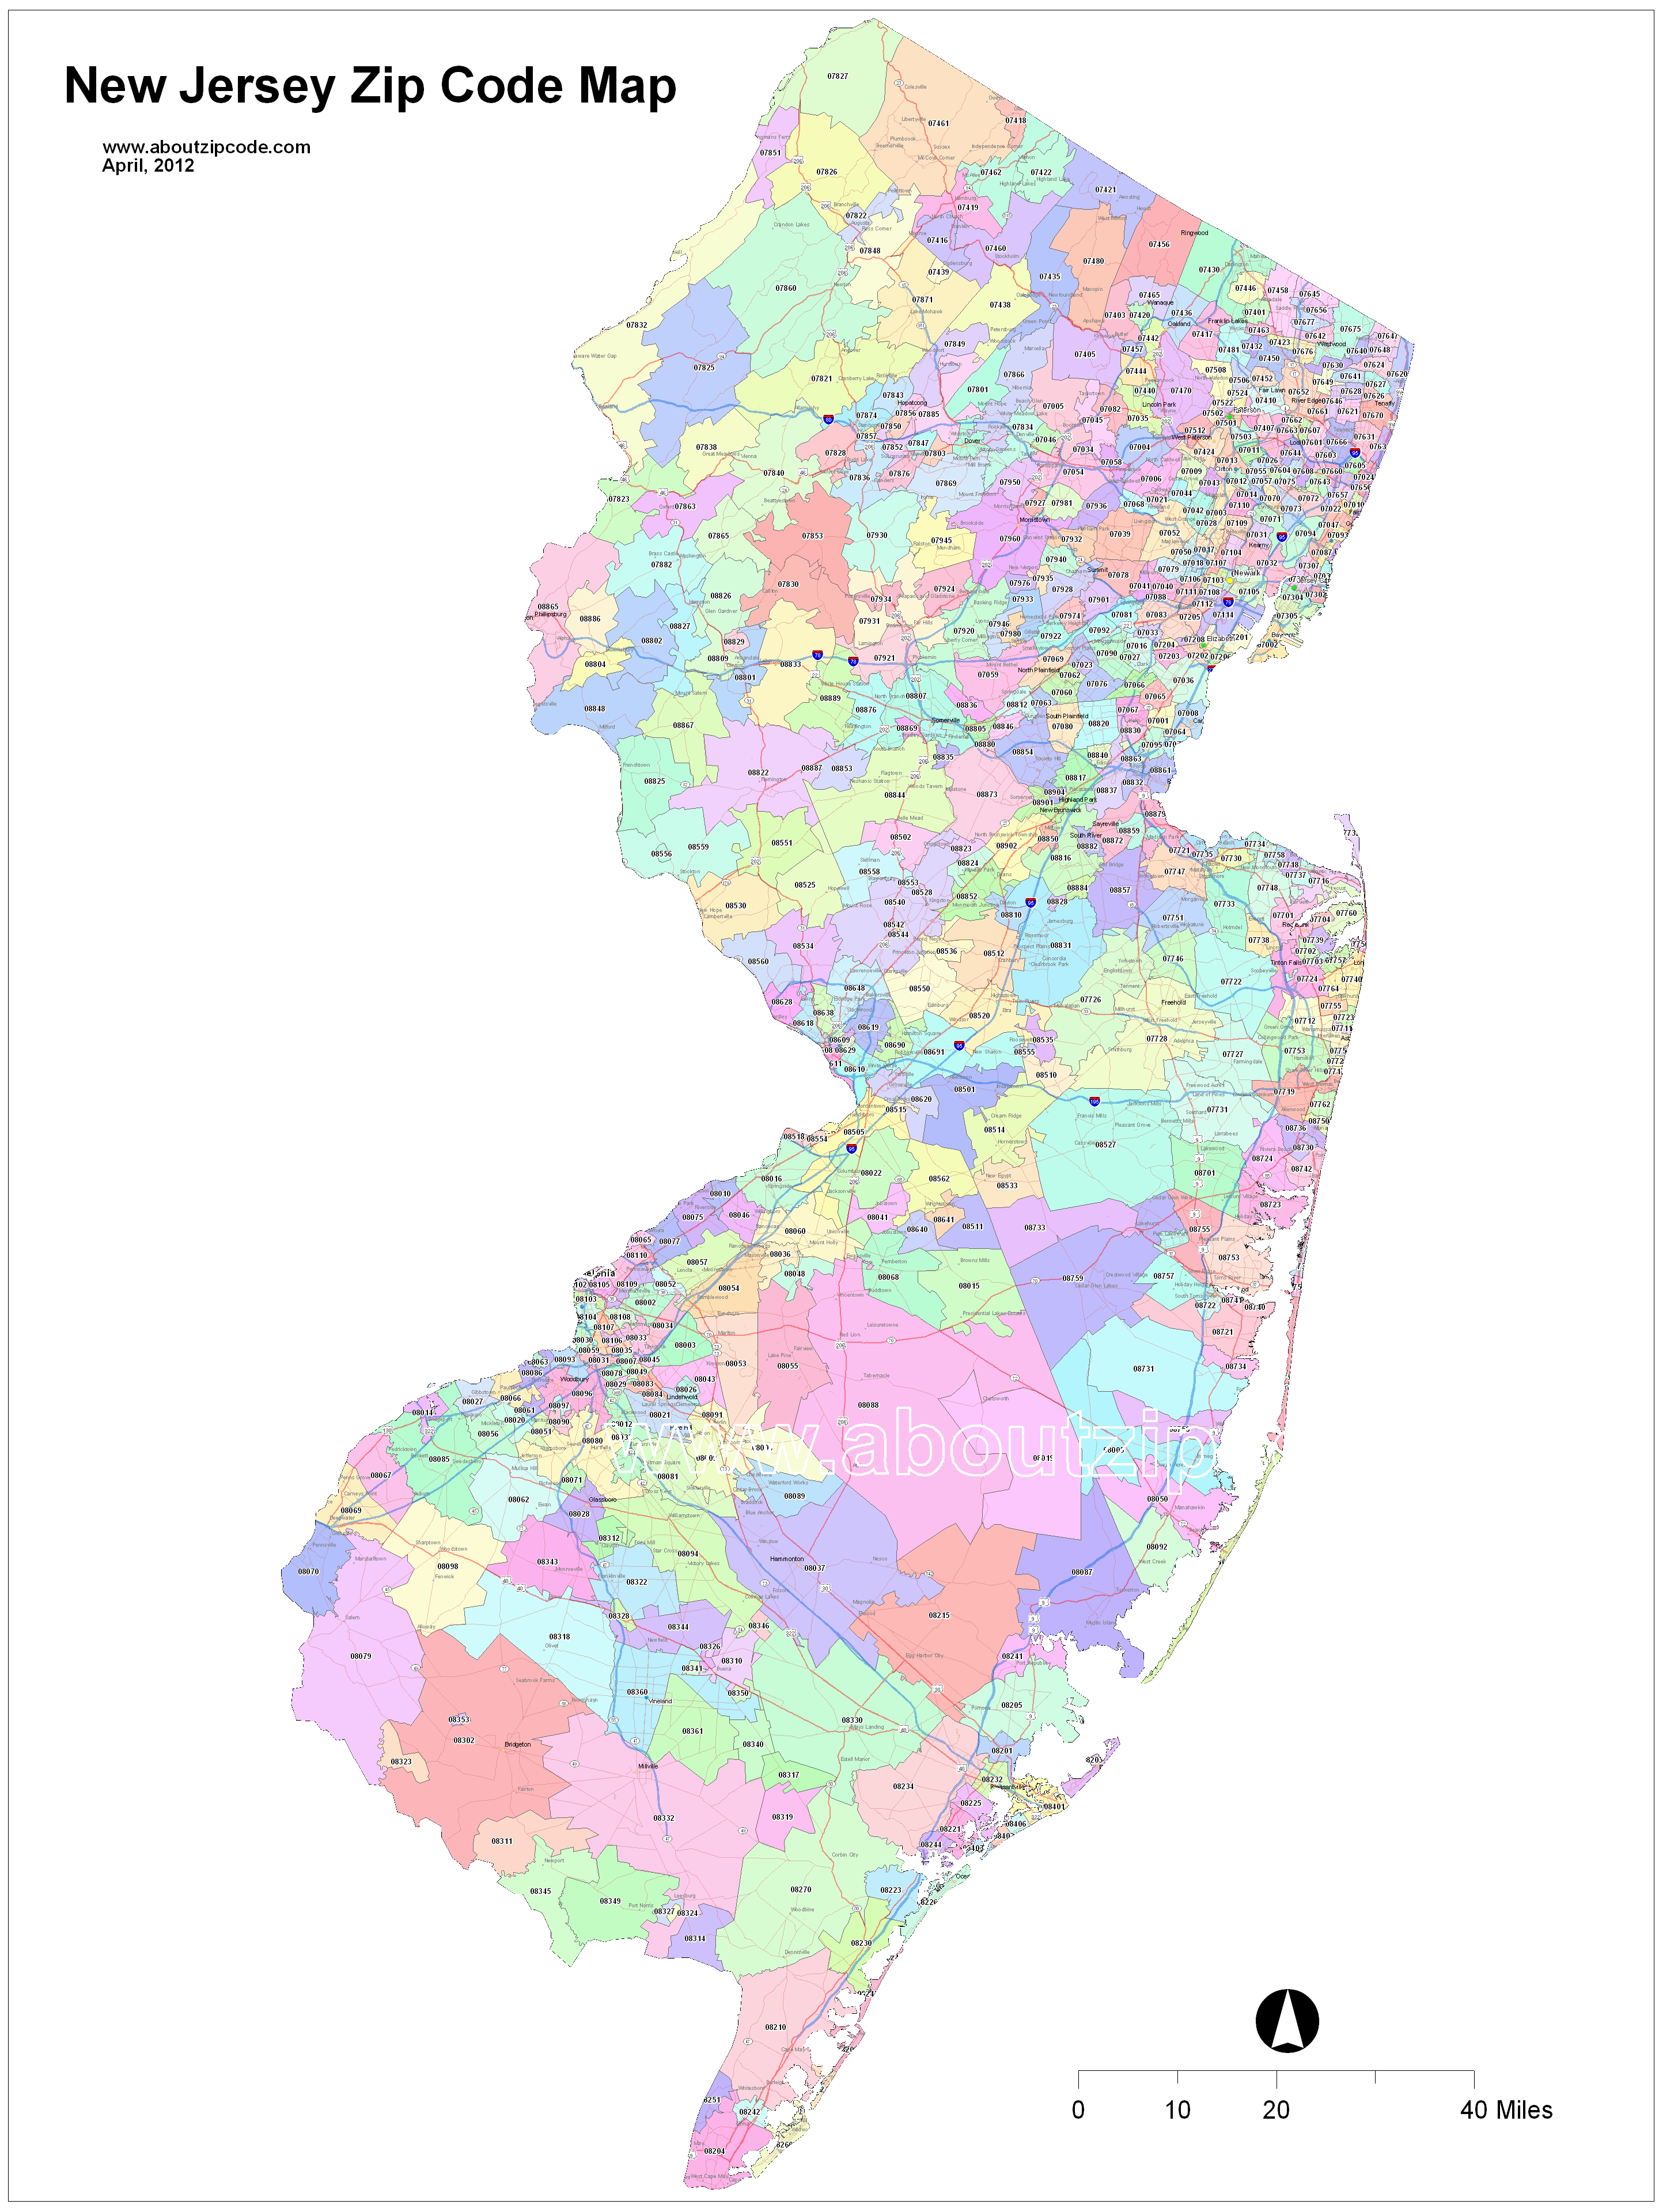 northern new jersey zip code map New Jersey Zip Code Maps Free New Jersey Zip Code Maps northern new jersey zip code map